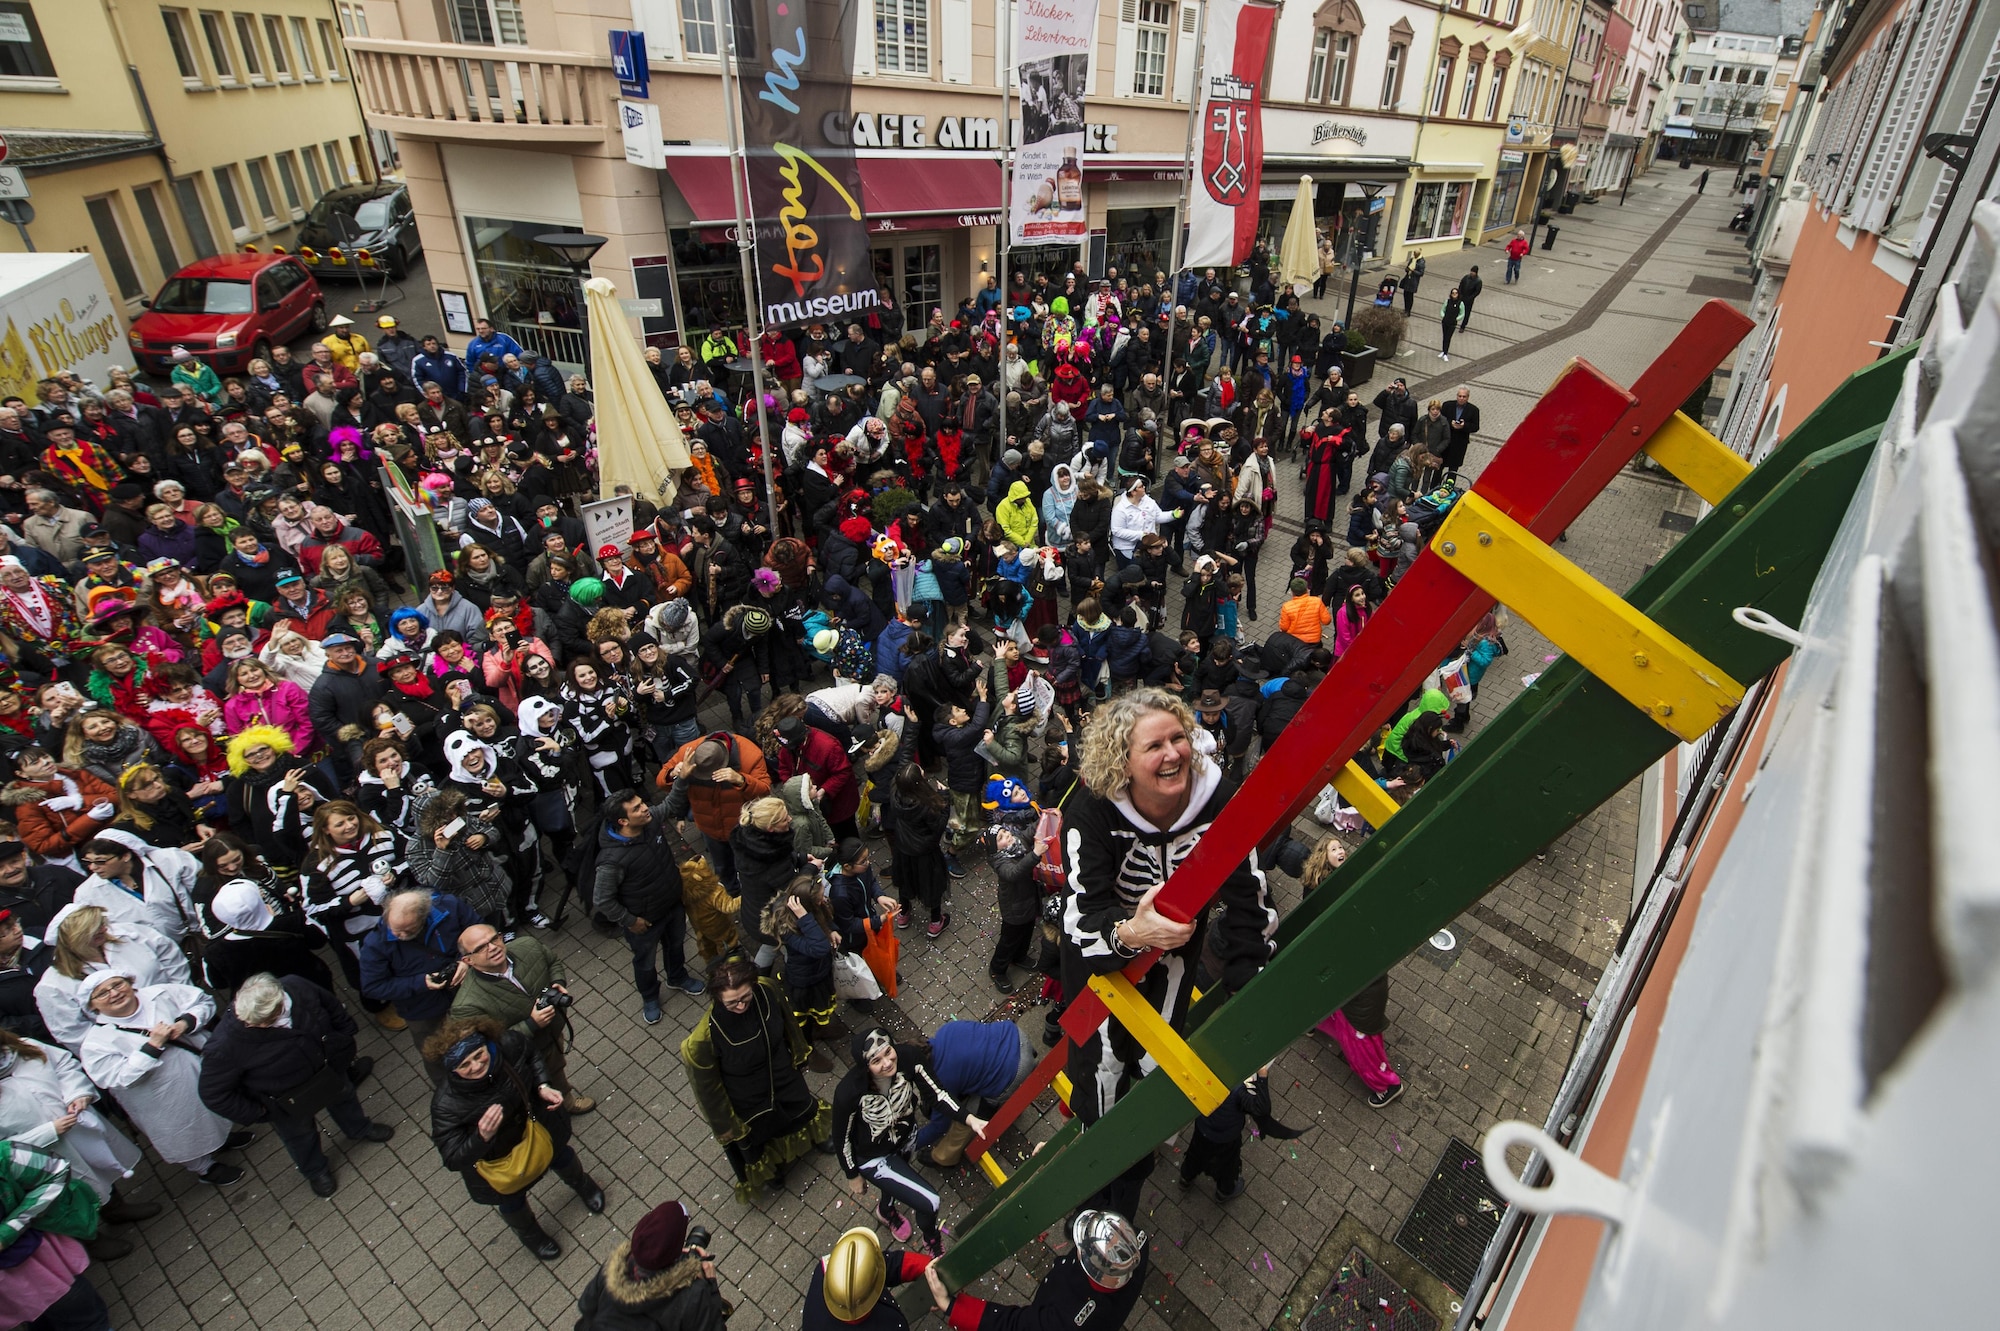 Heather Horton, spouse of the 52nd Fighter Wing vice commander, climbs the ladder up to city hall during a Fasching celebration in Wittlich, Germany, Feb. 23, 2017. Once the ladies have “taken over” the city hall, the celebrations begin with dancing and parading throughout the city. The traditional Fasching celebrations begin the Thursday prior to Lent at the 11th minute past the 11th hour, continue until Ash Wednesday and allow people to indulge before the Lent season. (U.S. Air Force photo by Staff Sgt. Jonathan Snyder)